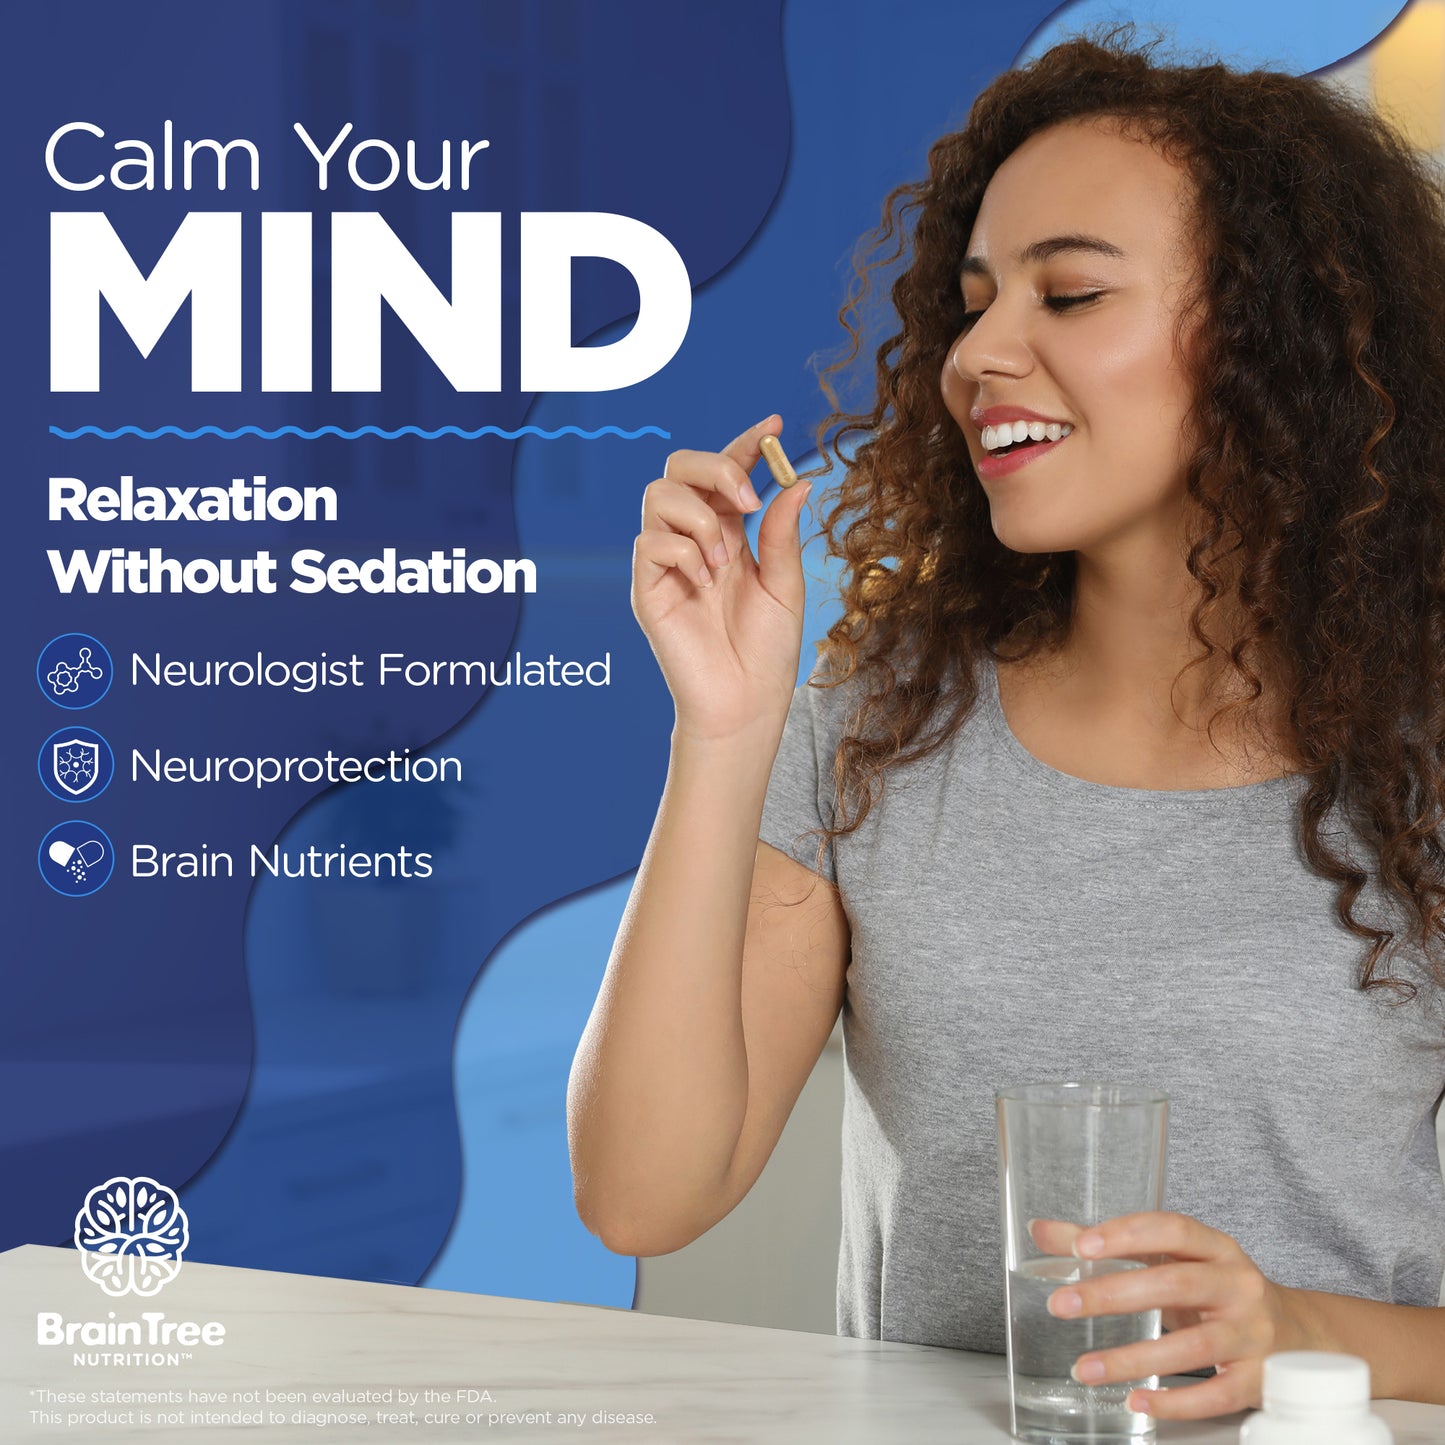 BrainTree Nutrition-Calm Your Mind Relaxation Without Sedation